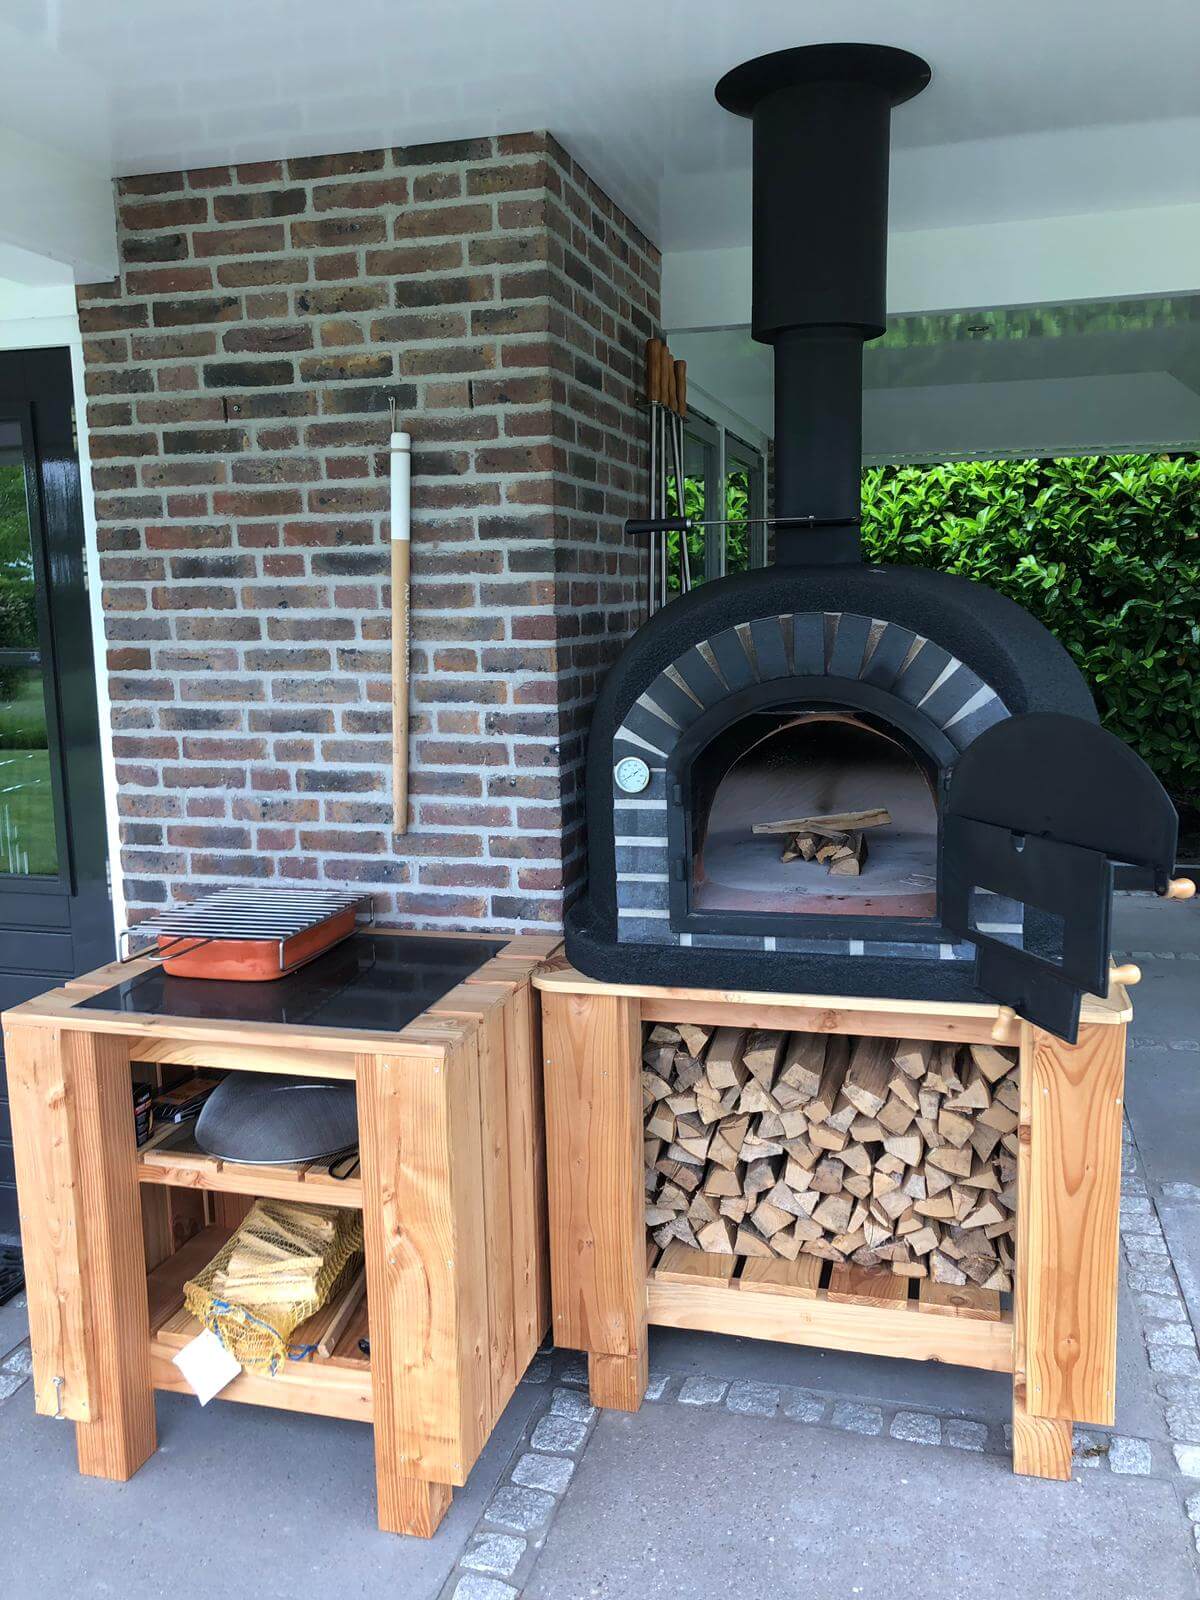 Pizza ovens in Pizzahoutoven.eu